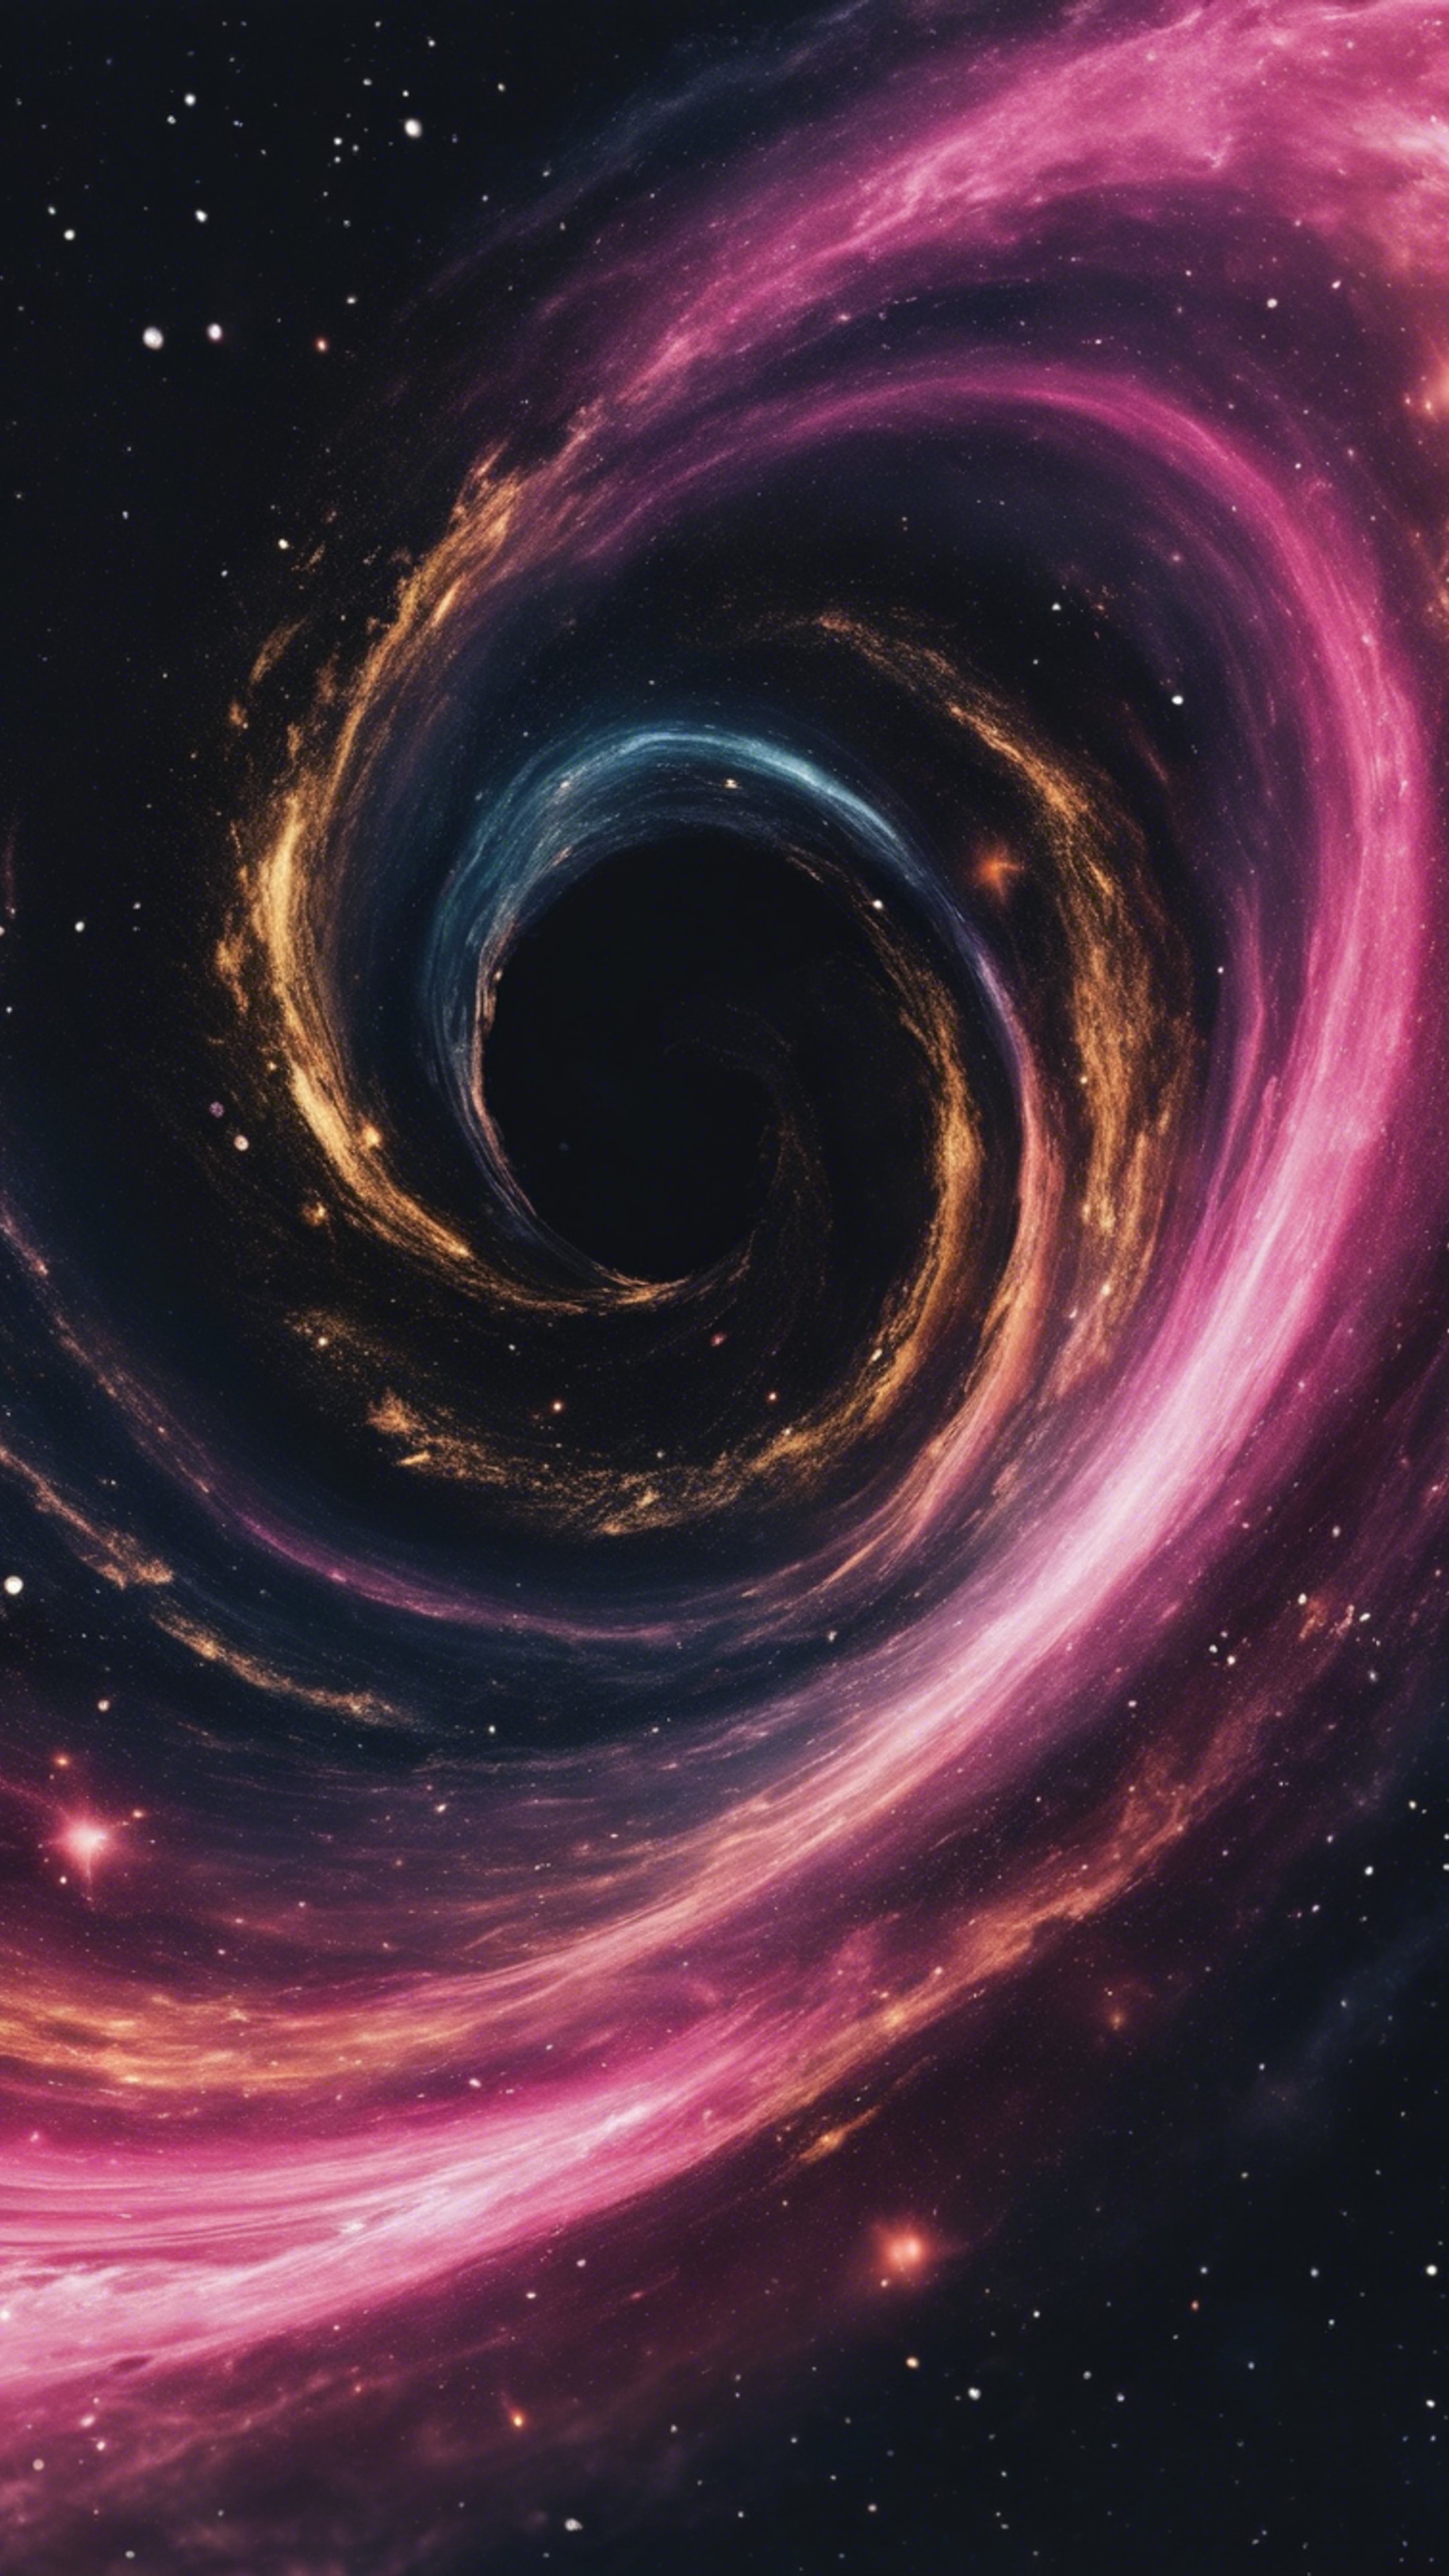 A swirling Galaxy with hues of pink and gold amongst the dark void of space. Tapetai[38386911806f452c9333]